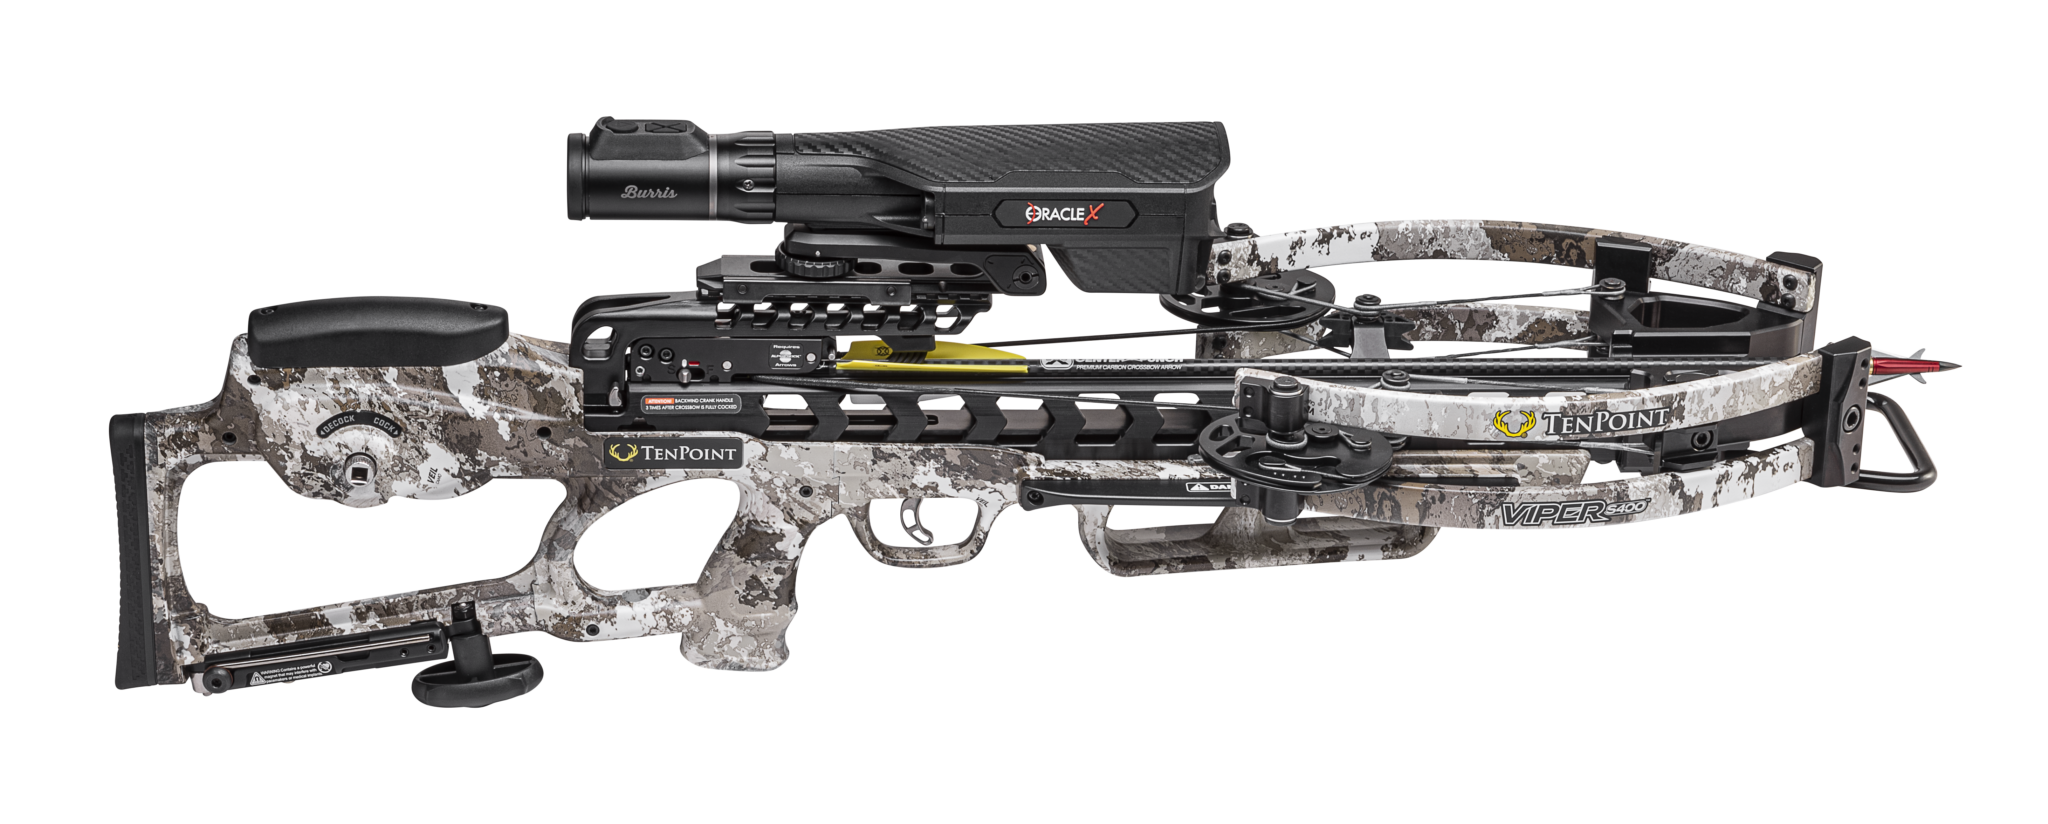 New Tenpoint Viper S400 Oracle X Most Affordable Crossbow With